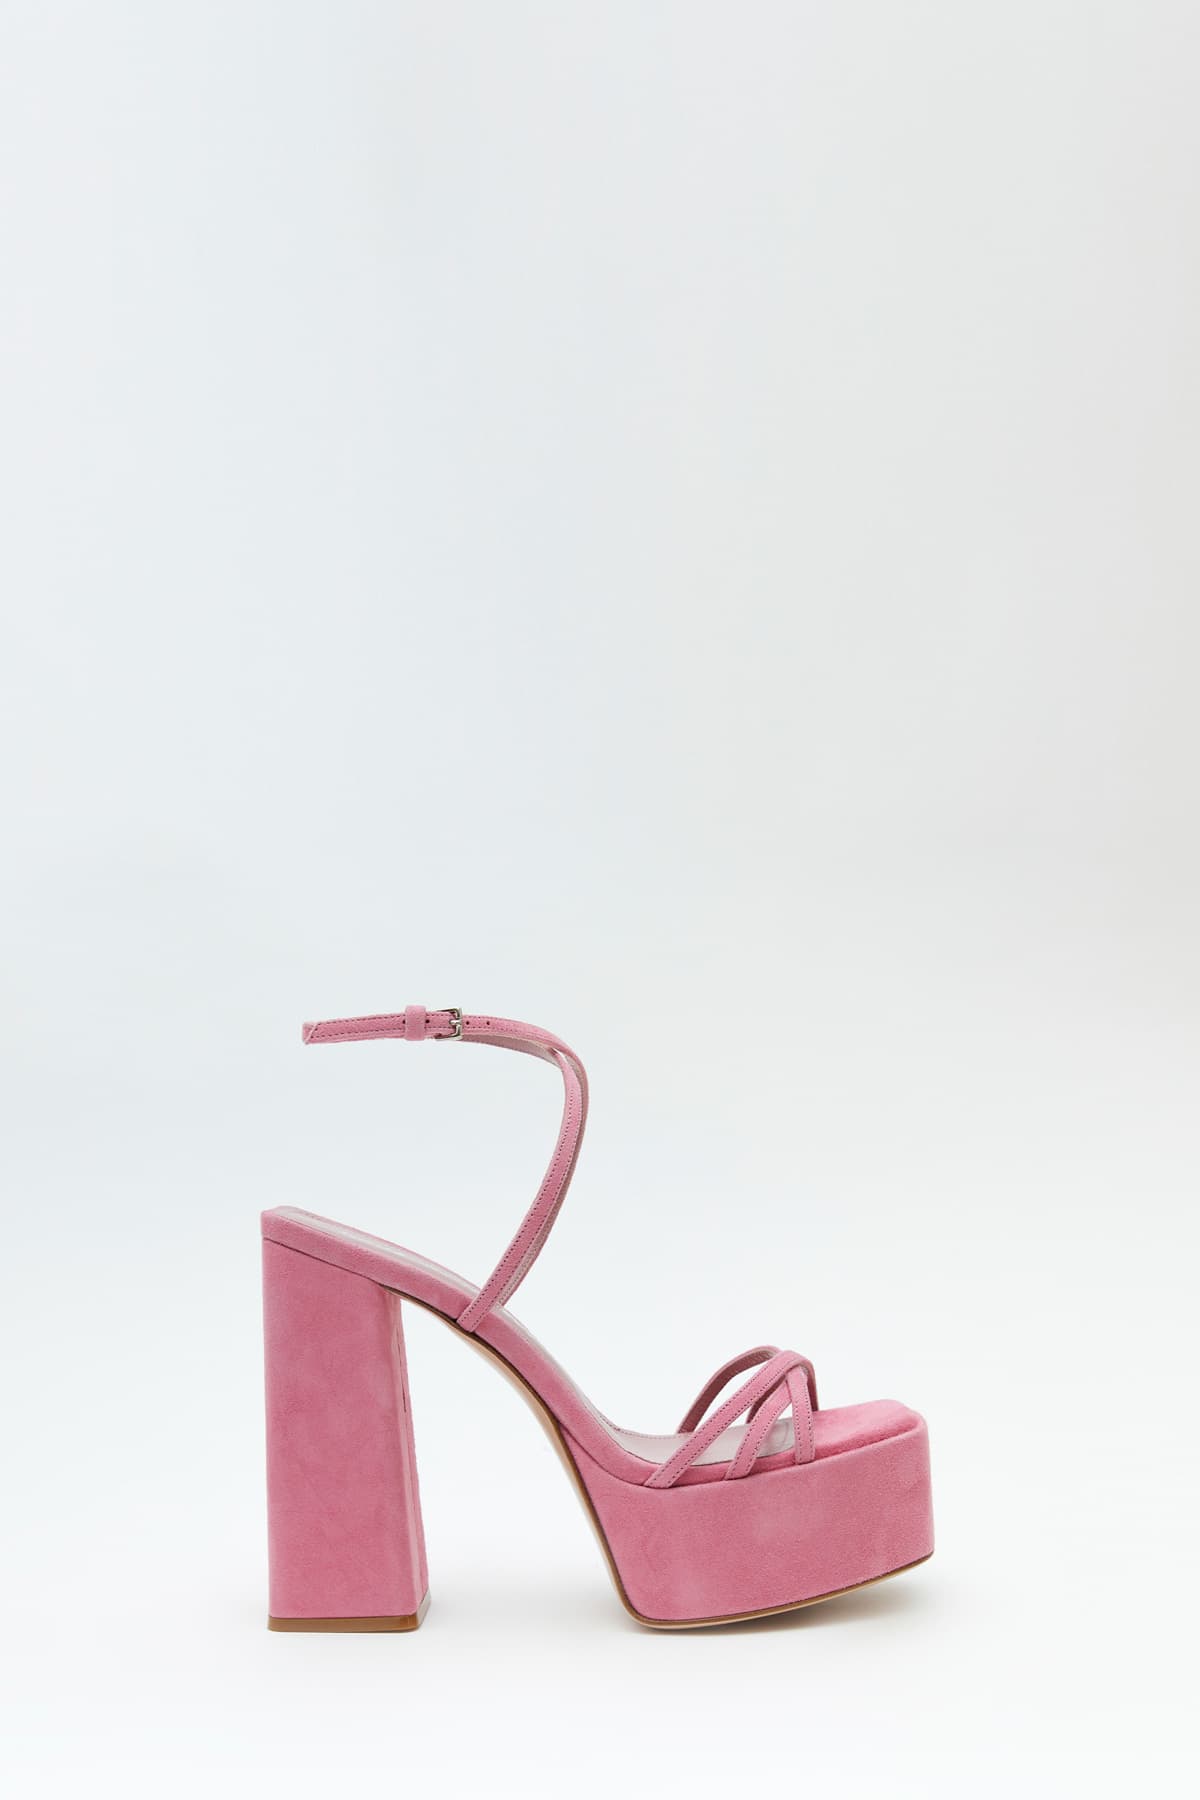 Sideview of The Wannabe mule in pink from the Haus of Honey fall-winter 2023-24